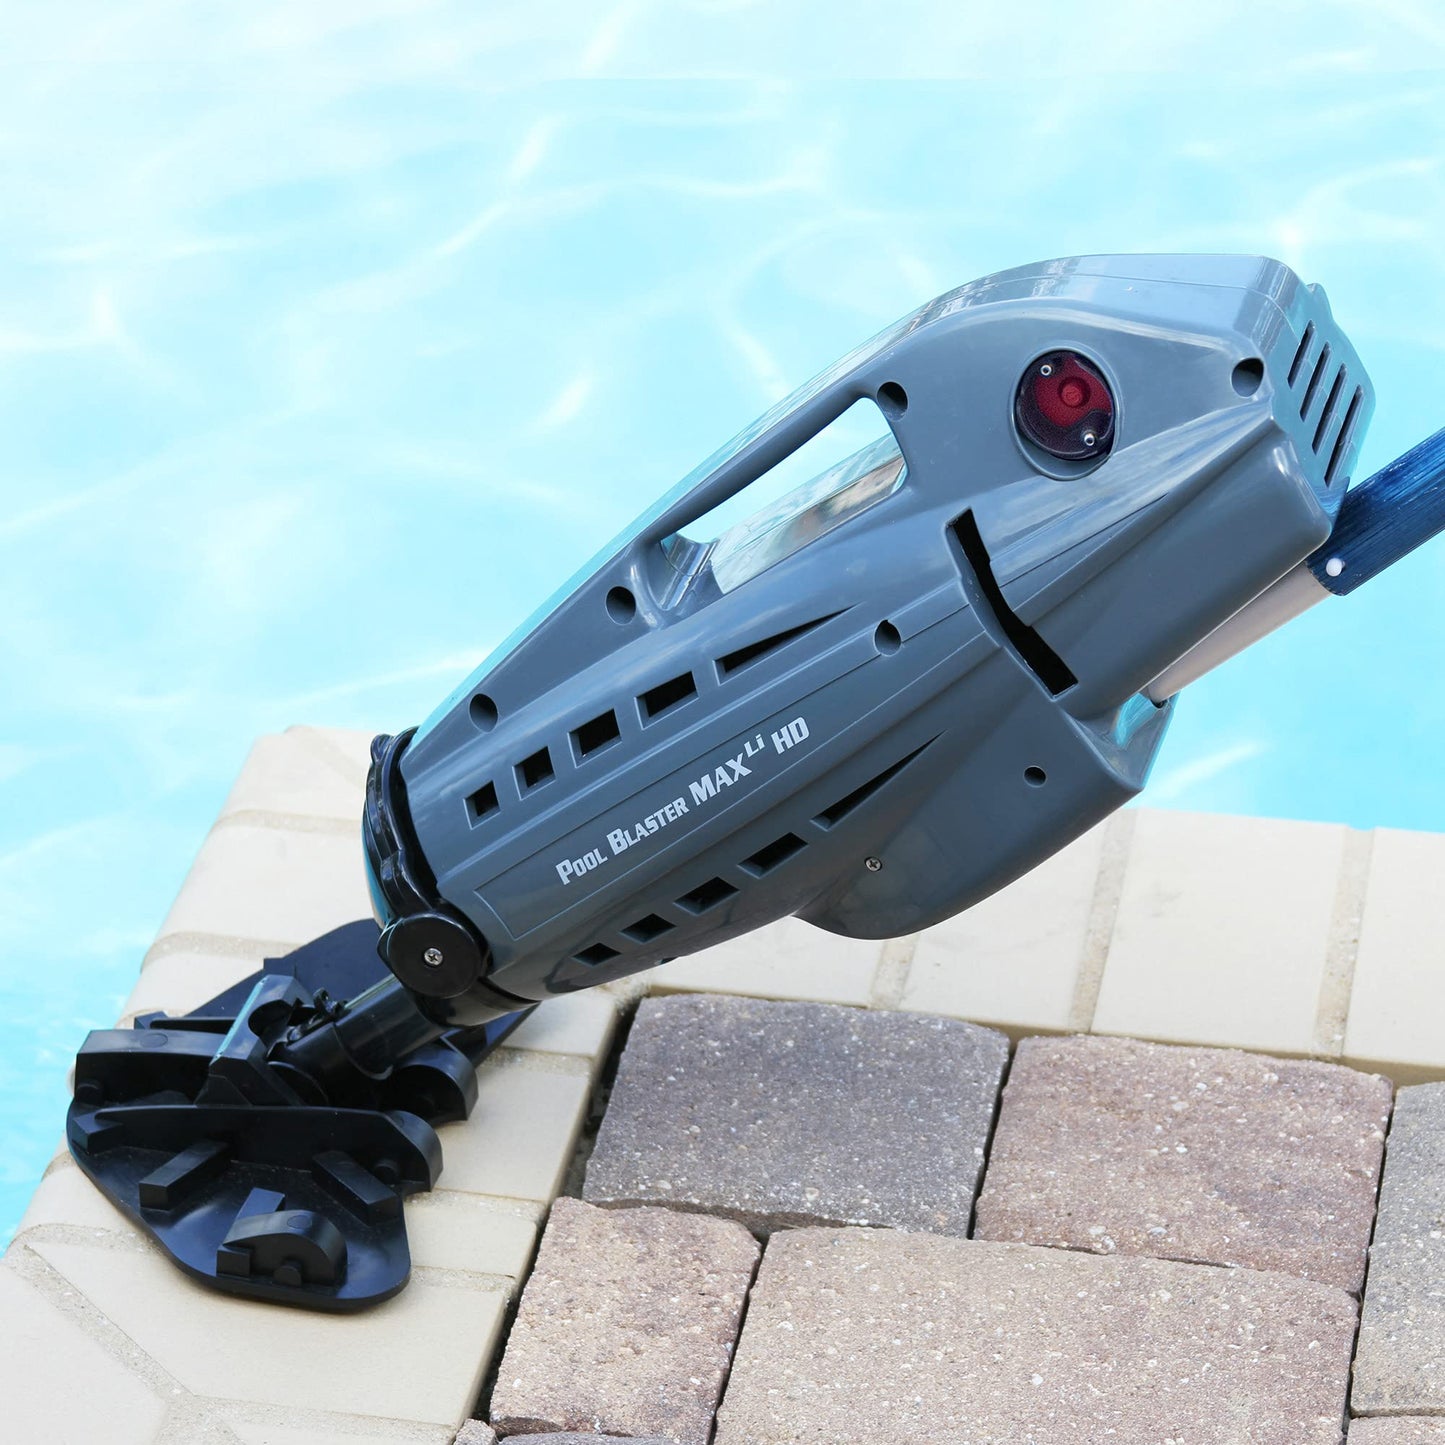 POOL BLASTER Max HD Cordless Pool Vacuum - Heavy-Duty Cleaning with High Capacity, Handheld Rechargeable Swimming Pool Cleaner for Inground & Above Ground Pool, Hoseless Design by Water Tech